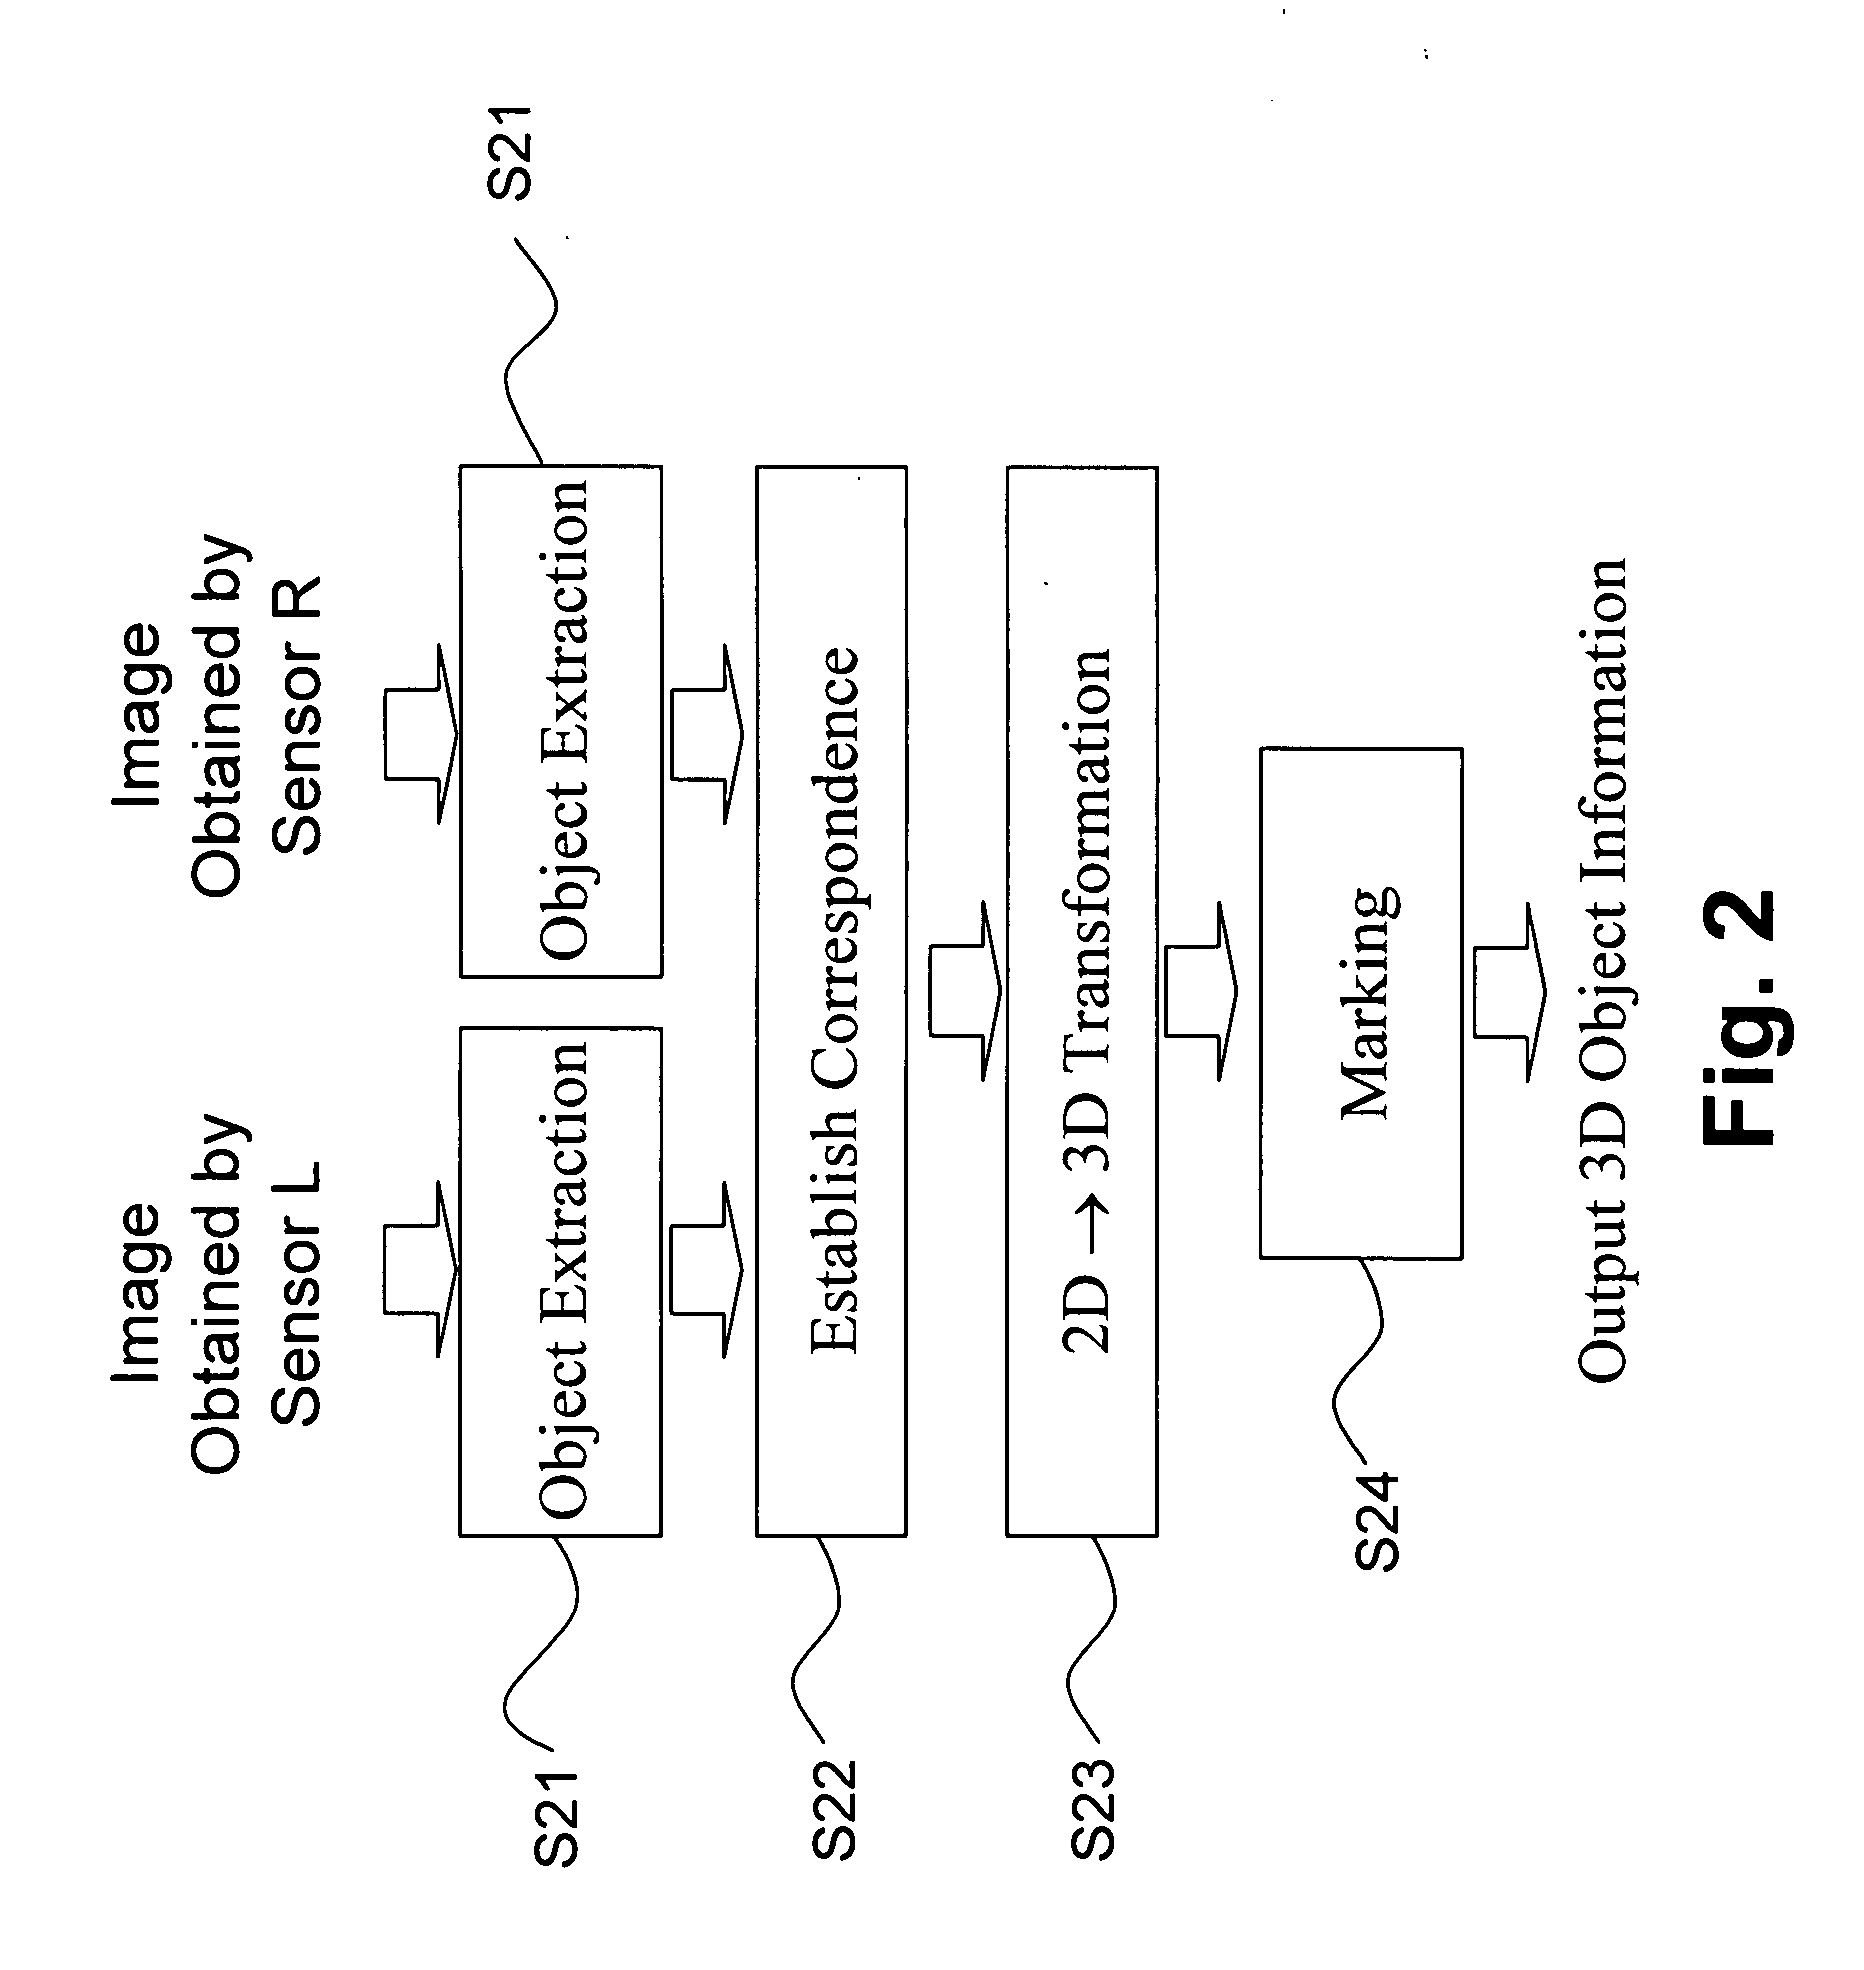 Object-based 3-dimensional stereo information generation apparatus and method, and interactive system using the same